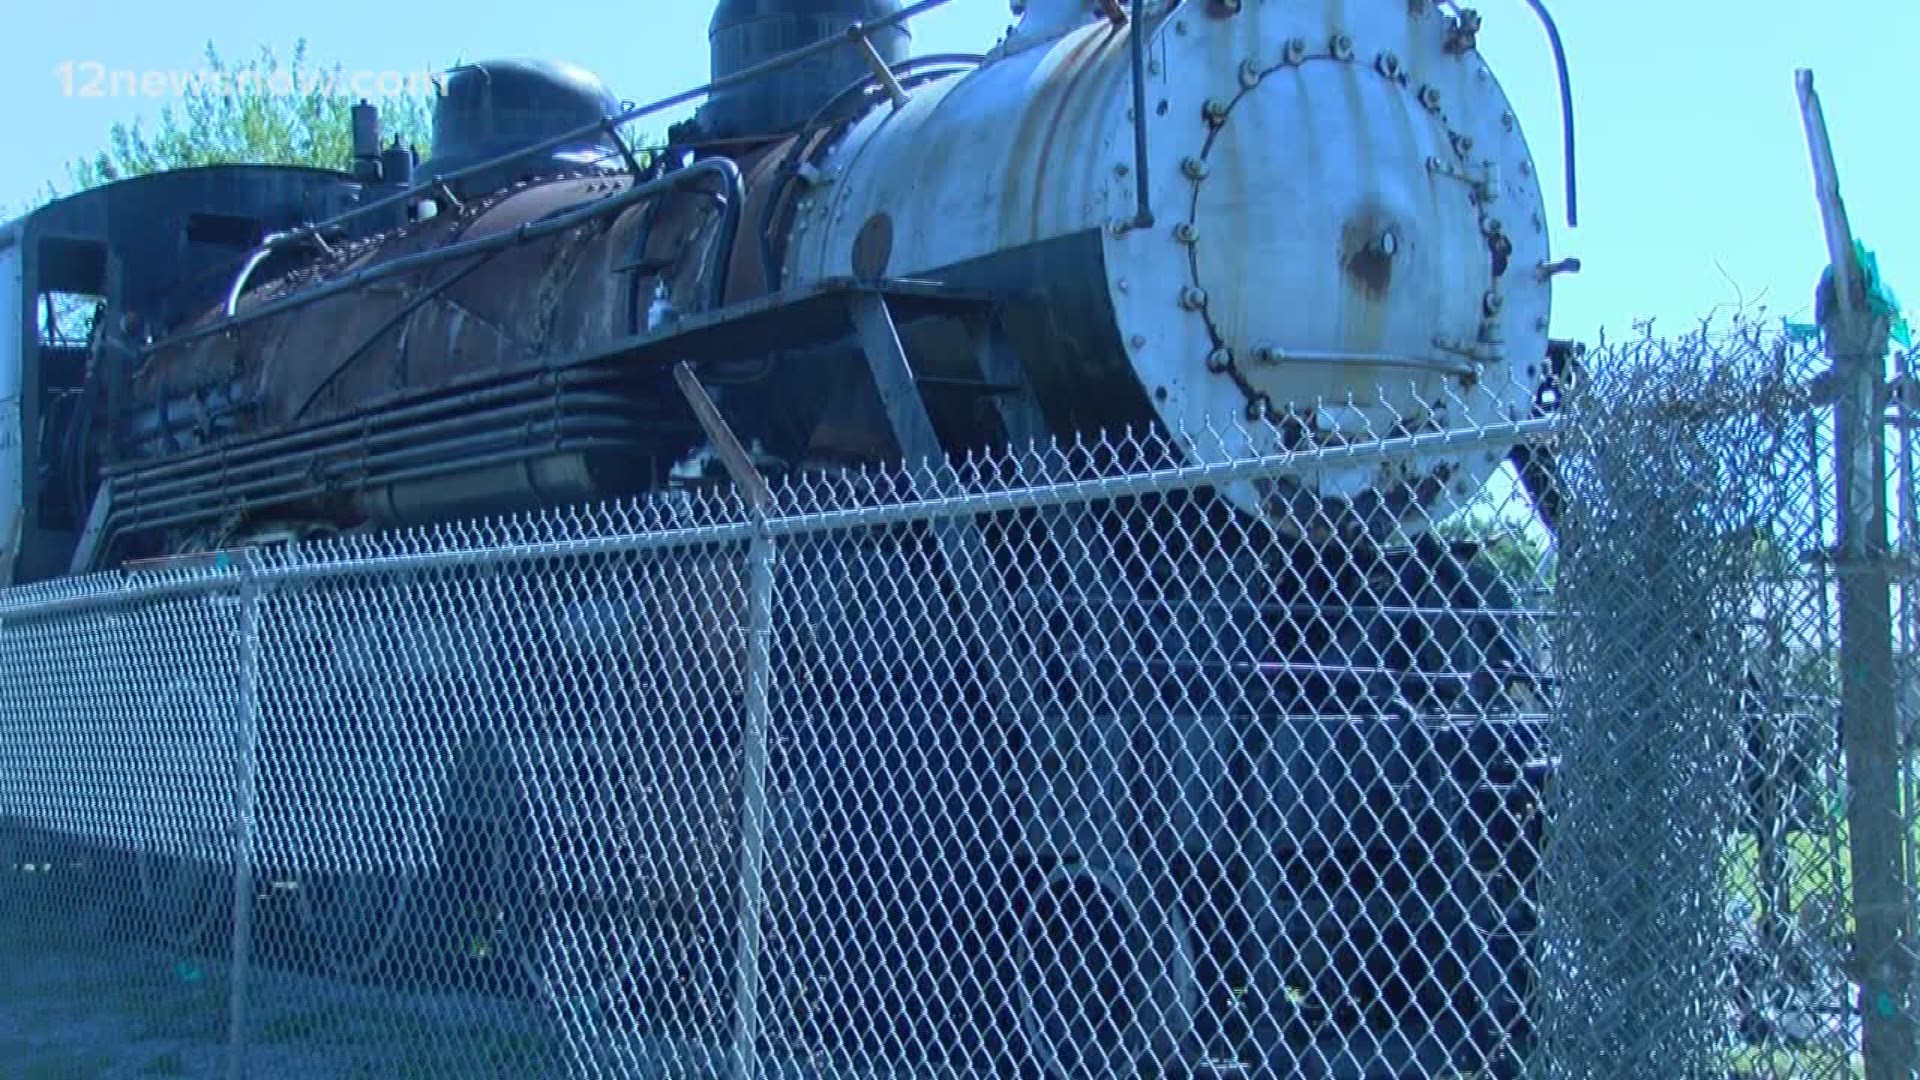 Bryan Park locomotive to be moved